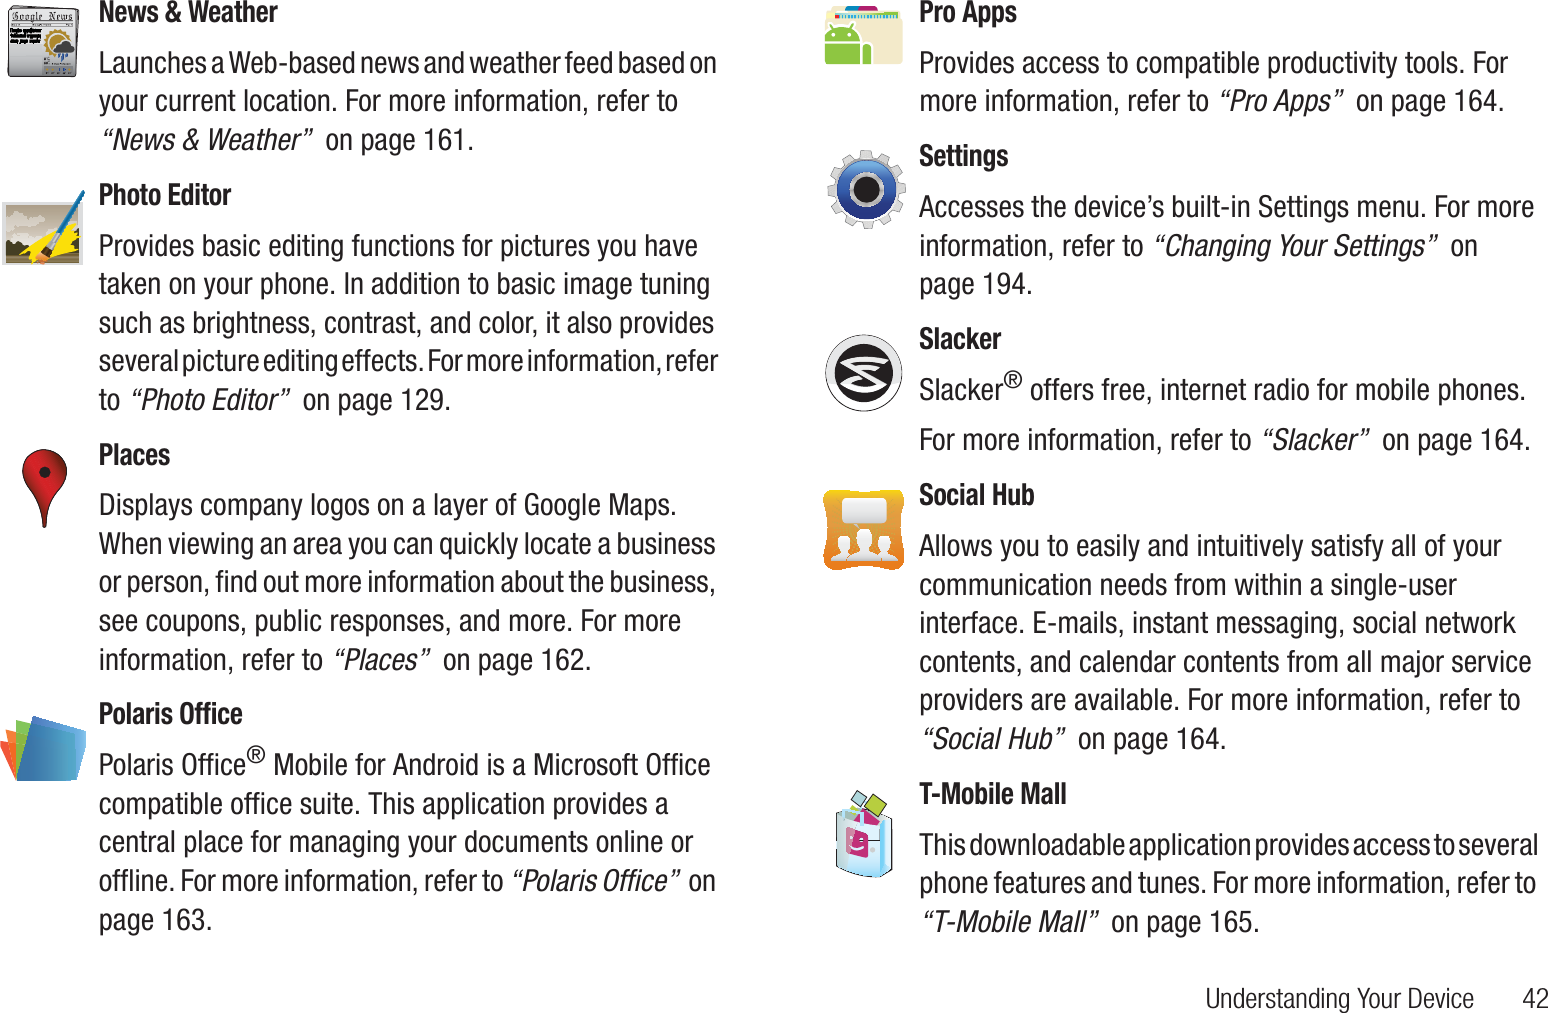 Understanding Your Device       42News &amp; WeatherLaunches a Web-based news and weather feed based on your current location. For more information, refer to “News &amp; Weather”  on page 161.Photo EditorProvides basic editing functions for pictures you have taken on your phone. In addition to basic image tuning such as brightness, contrast, and color, it also provides several picture editing effects. For more information, refer to “Photo Editor”  on page 129.PlacesDisplays company logos on a layer of Google Maps. When viewing an area you can quickly locate a business or person, find out more information about the business, see coupons, public responses, and more. For more information, refer to “Places”  on page 162.Polaris OfficePolaris Office® Mobile for Android is a Microsoft Office compatible office suite. This application provides a central place for managing your documents online or offline. For more information, refer to “Polaris Office”  on page 163.Pro AppsProvides access to compatible productivity tools. For more information, refer to “Pro Apps”  on page 164.SettingsAccesses the device’s built-in Settings menu. For more information, refer to “Changing Your Settings”  on page 194.SlackerSlacker® offers free, internet radio for mobile phones.For more information, refer to “Slacker”  on page 164.Social HubAllows you to easily and intuitively satisfy all of your communication needs from within a single-user interface. E-mails, instant messaging, social network contents, and calendar contents from all major service providers are available. For more information, refer to “Social Hub”  on page 164.T-Mobile MallThis downloadable application provides access to several phone features and tunes. For more information, refer to “T-Mobile Mall”  on page 165.